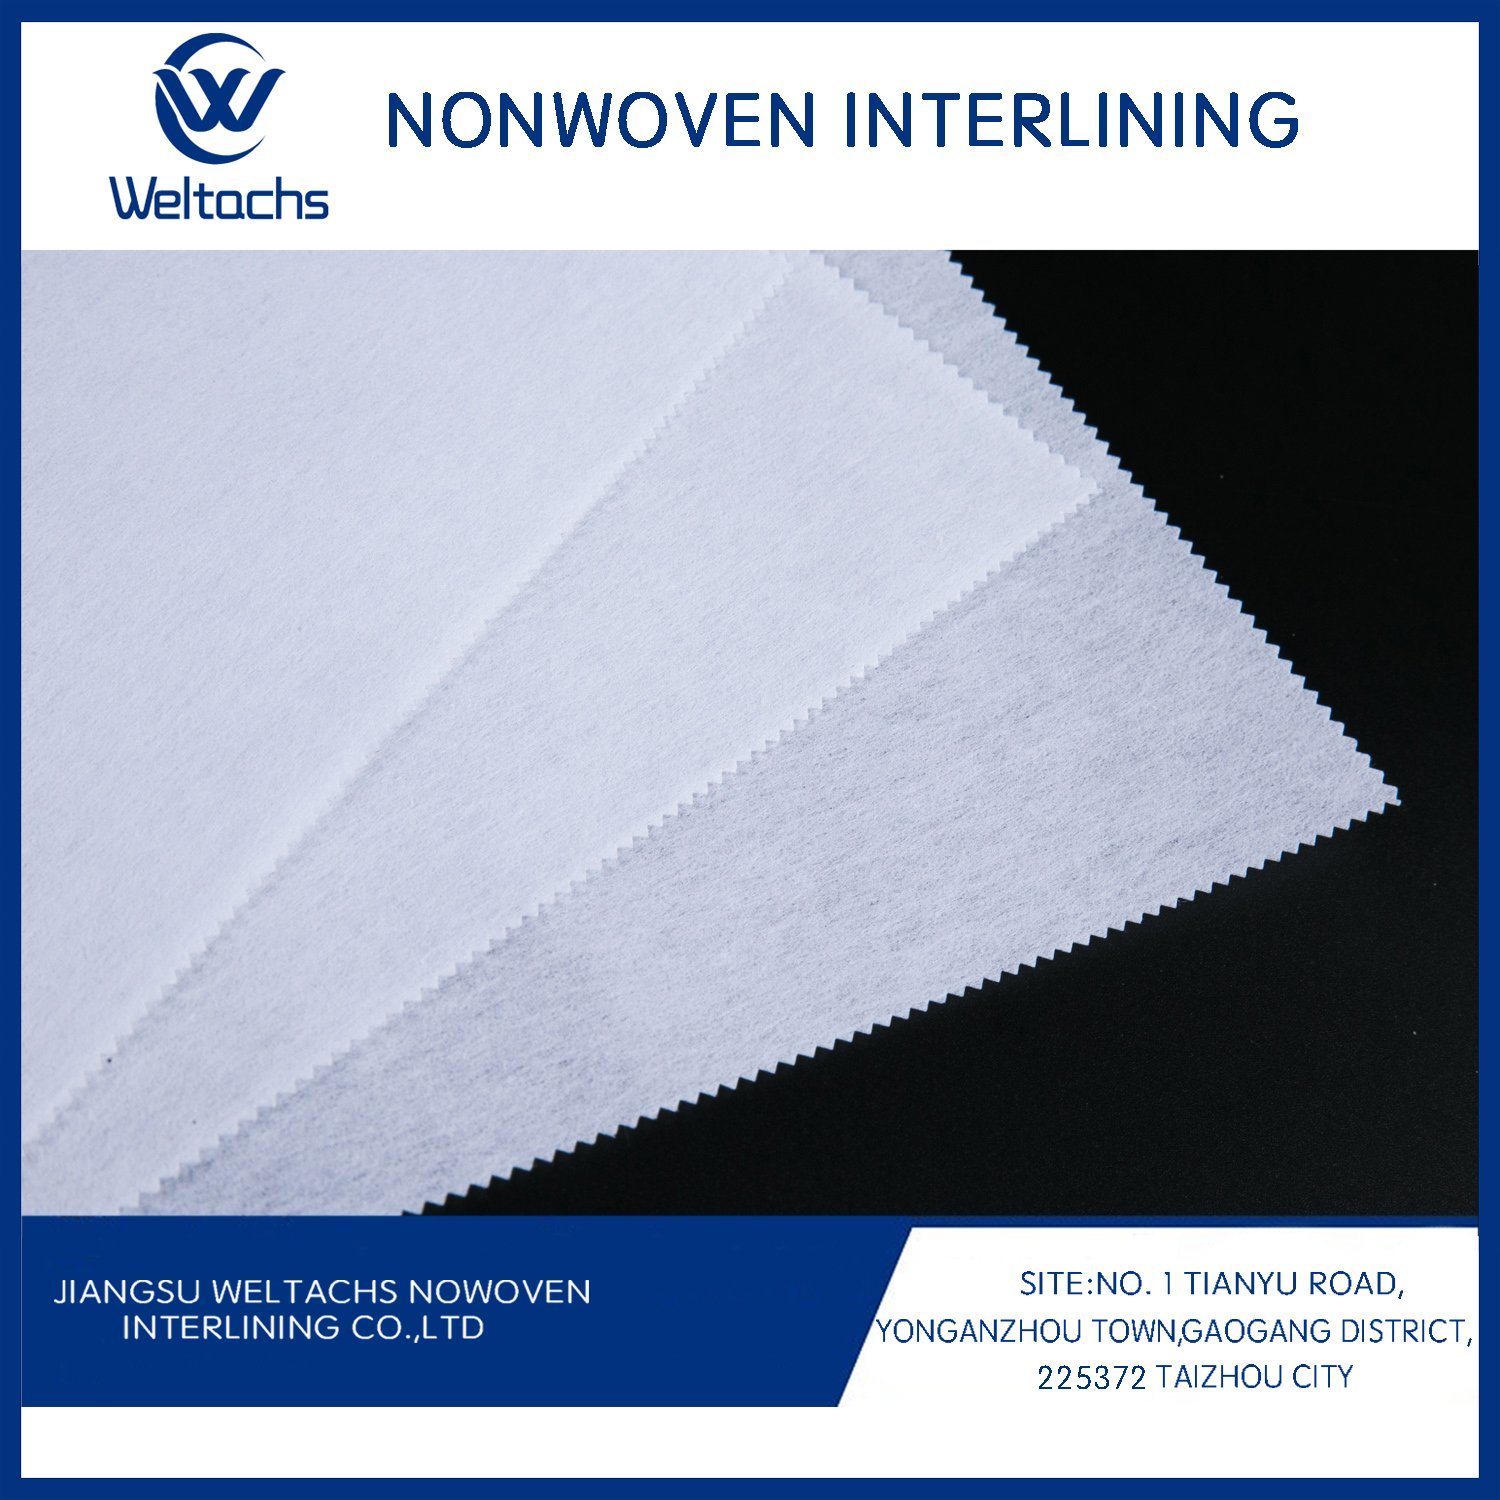 100% Cotton Tear Away Embroidery Backing Paper Interlining